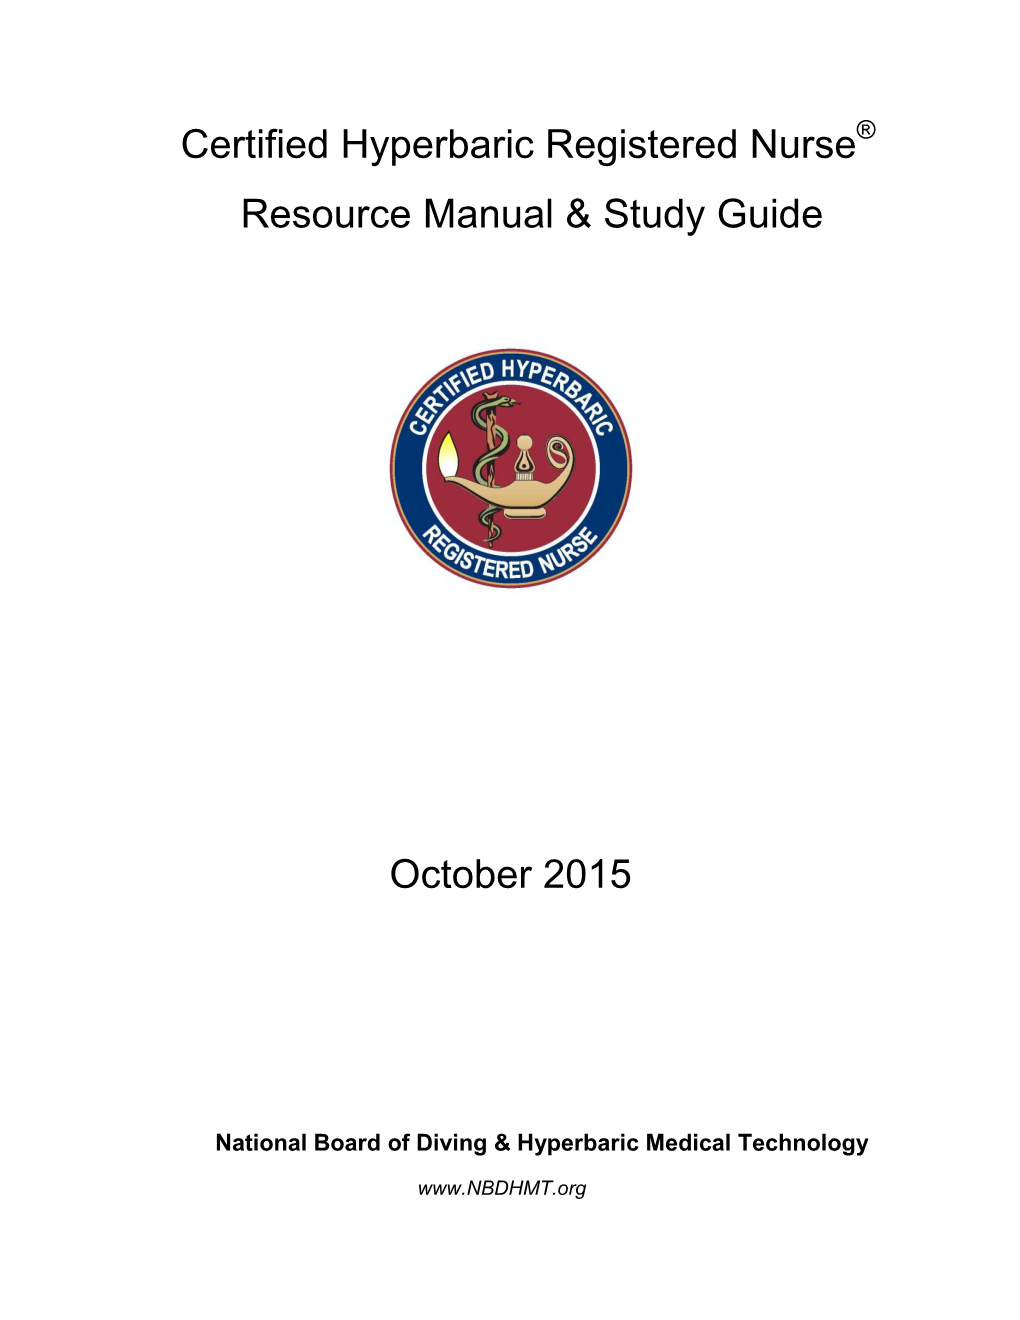 Certified Hyperbaric Registered Nurse Resource Manual & Study Guide